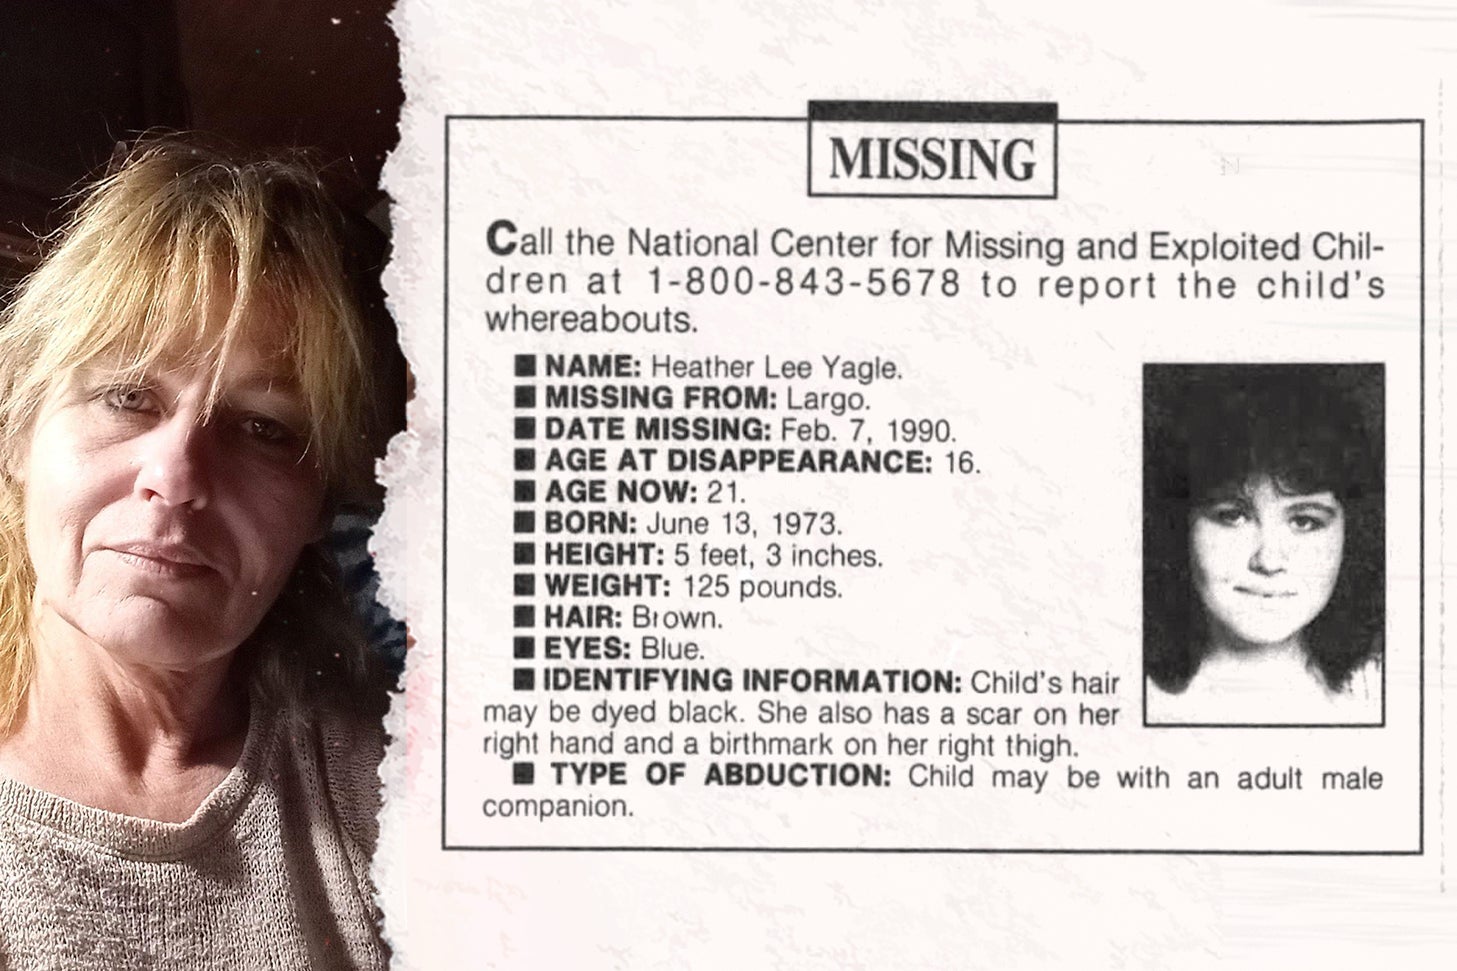 A present-day photo of Heather Yagle, a blond white woman, side-by-side with a "missing child" notice of her from the ’90s.